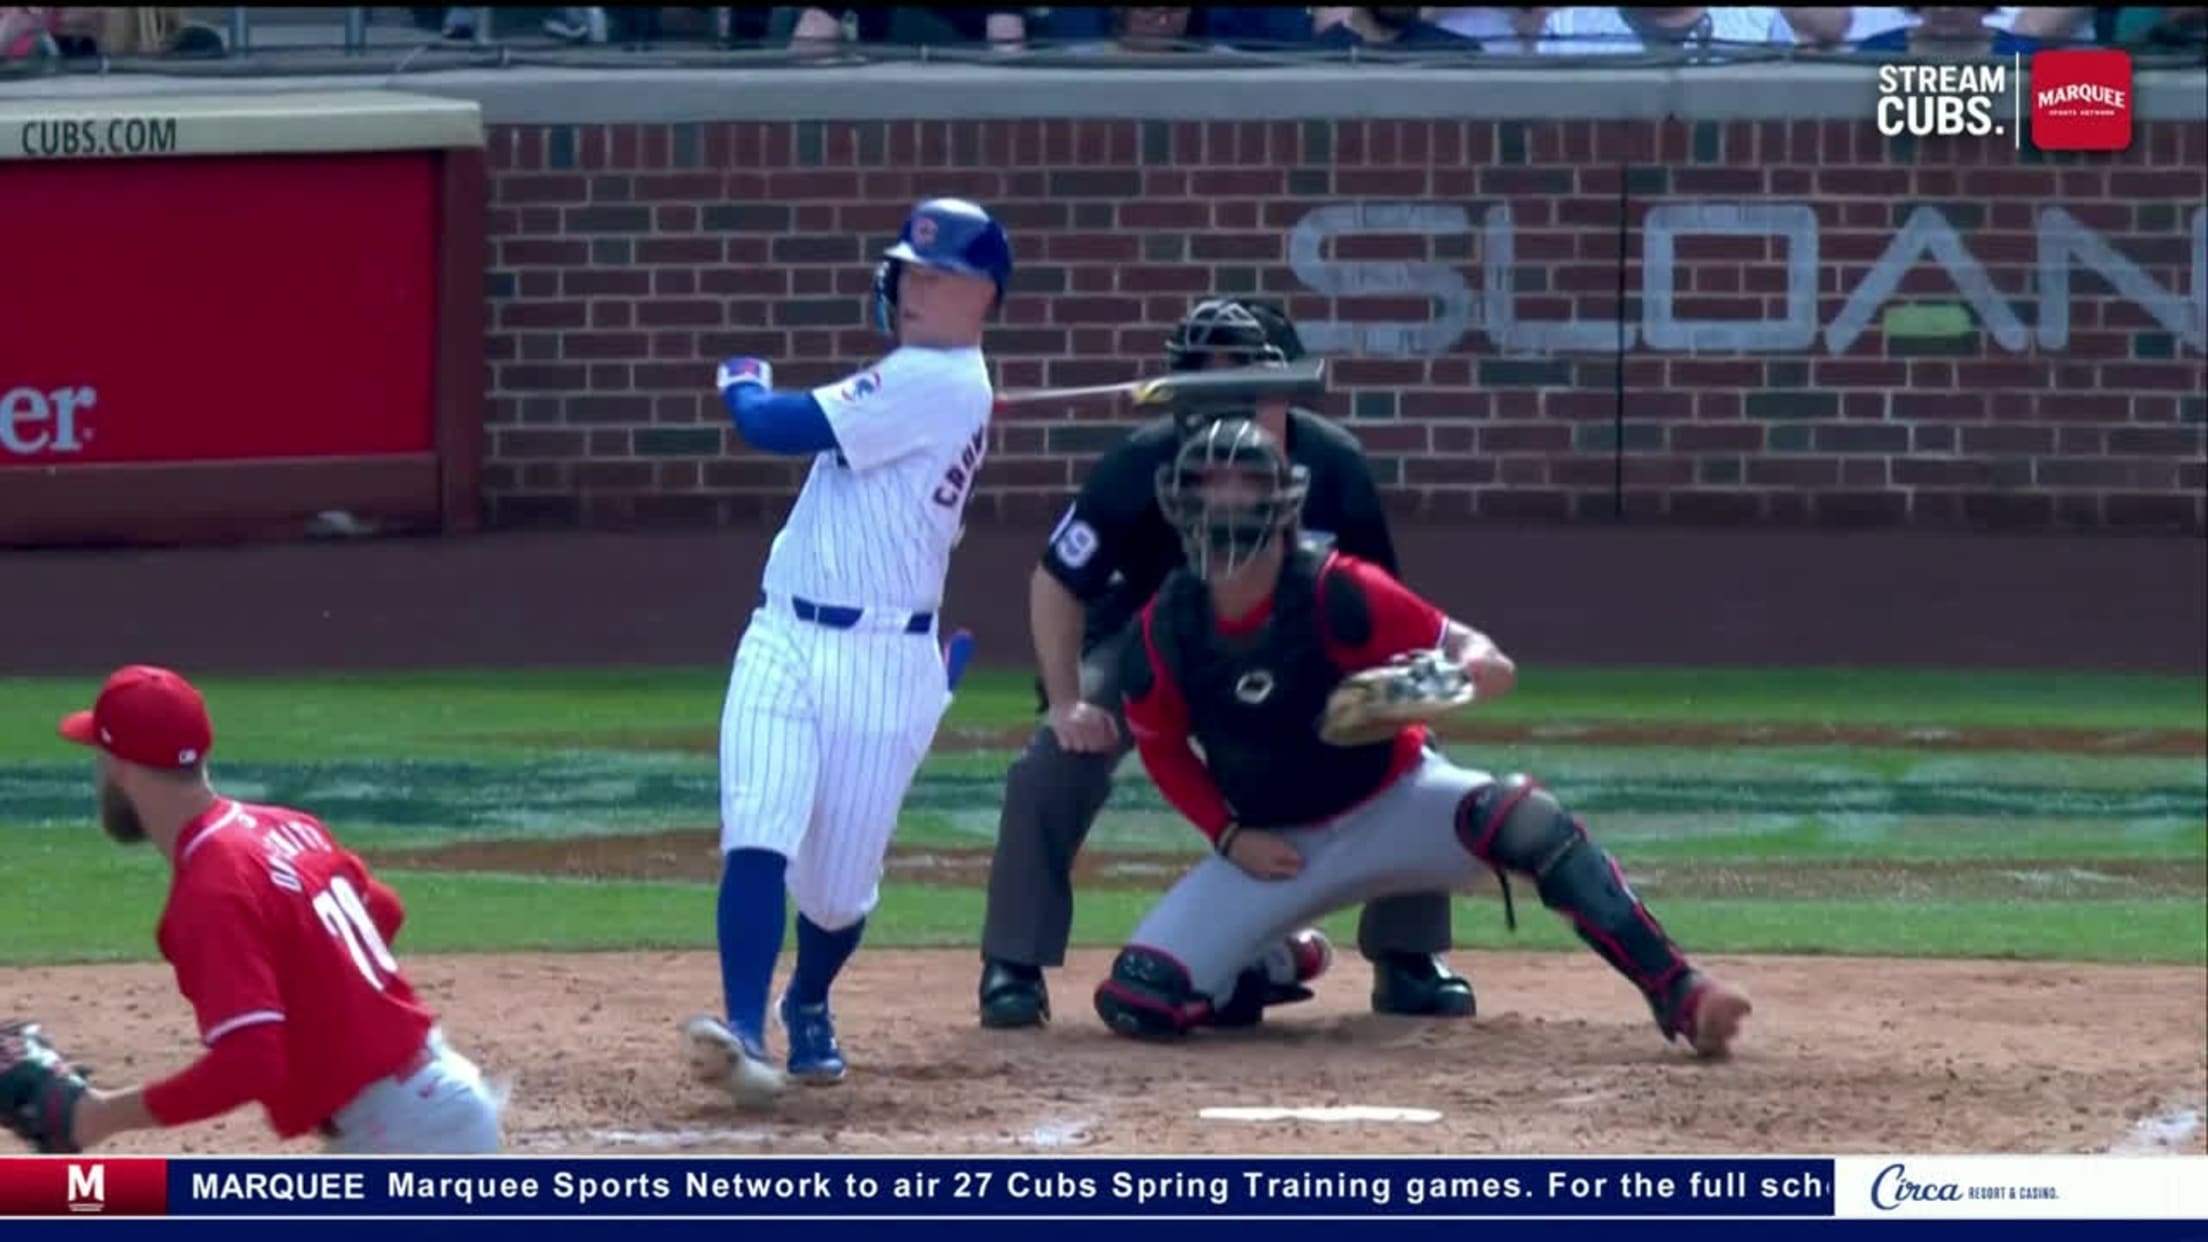 Cubs No. 1 prospect Pete Crow-Armstrong rips a double